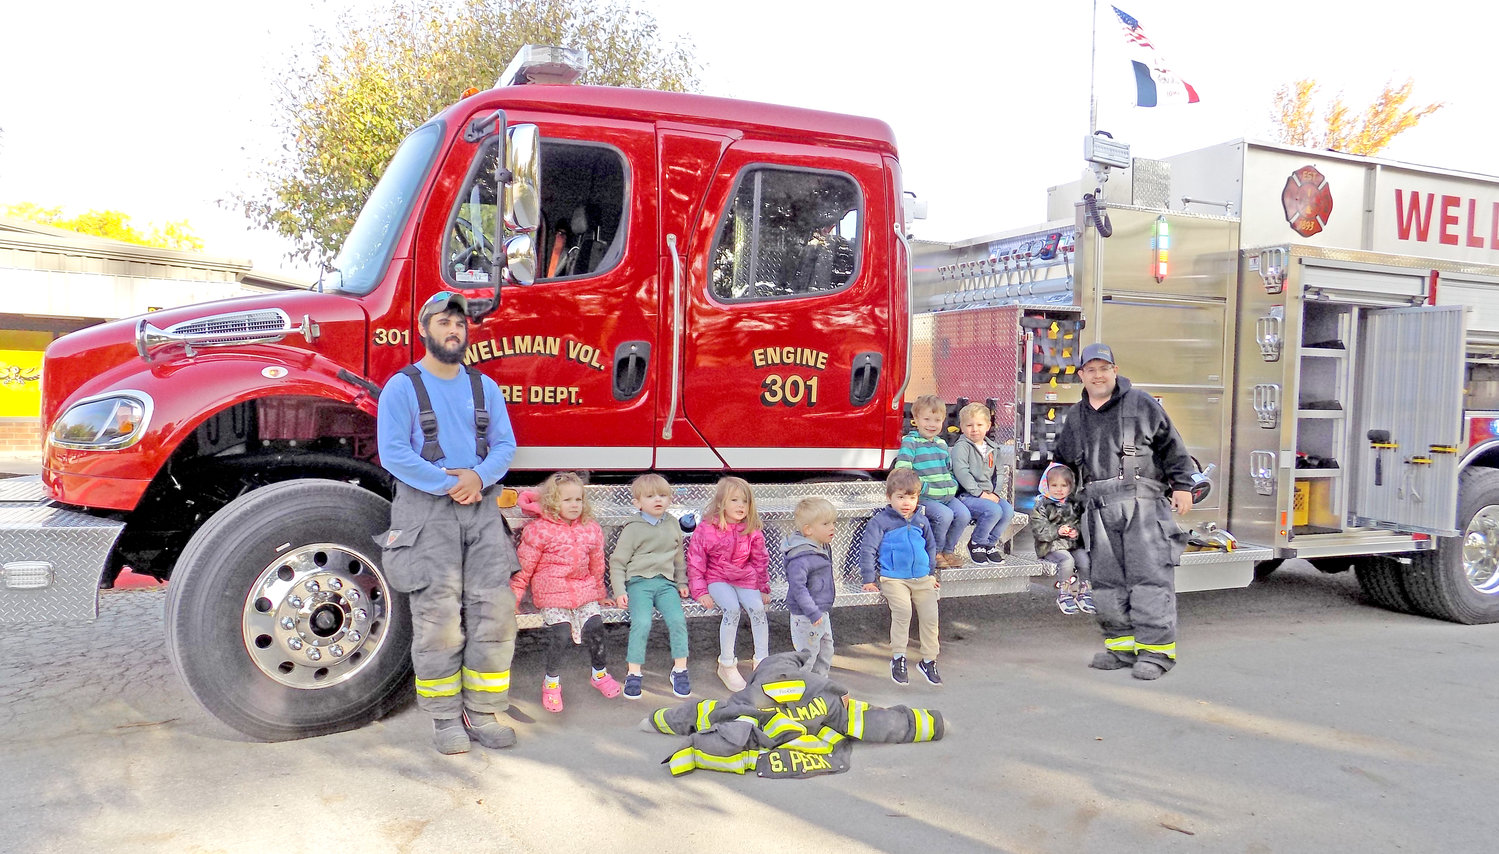 The preschoolers have been learning about fire prevention in the classroom with toy a firetruck, but they were especially excited to climb on and inside the real thing.